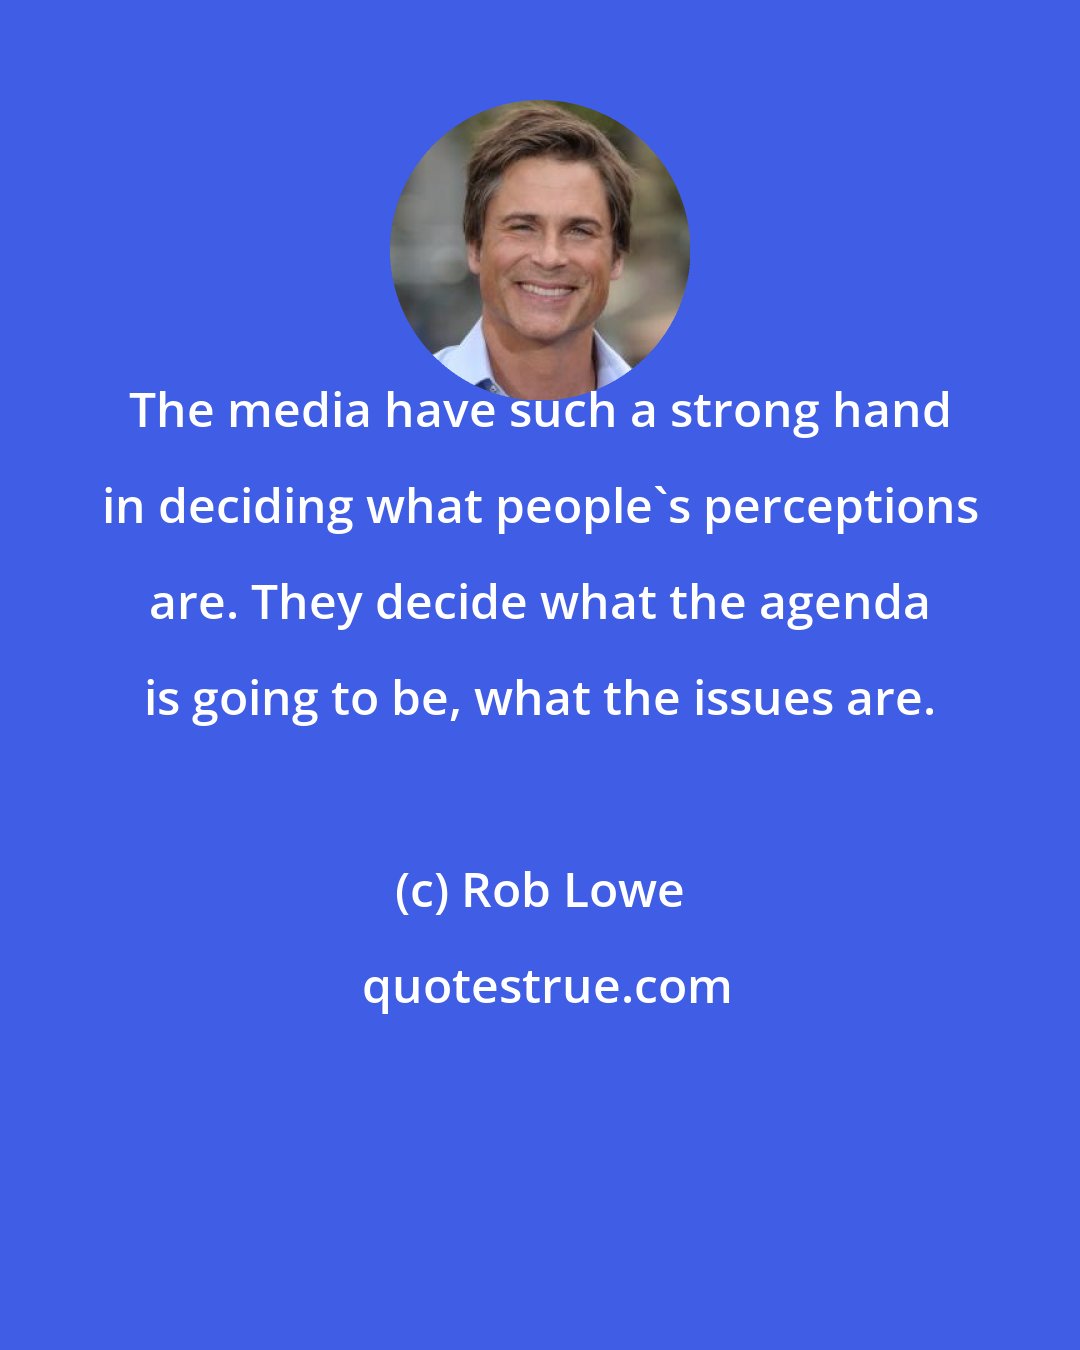 Rob Lowe: The media have such a strong hand in deciding what people's perceptions are. They decide what the agenda is going to be, what the issues are.